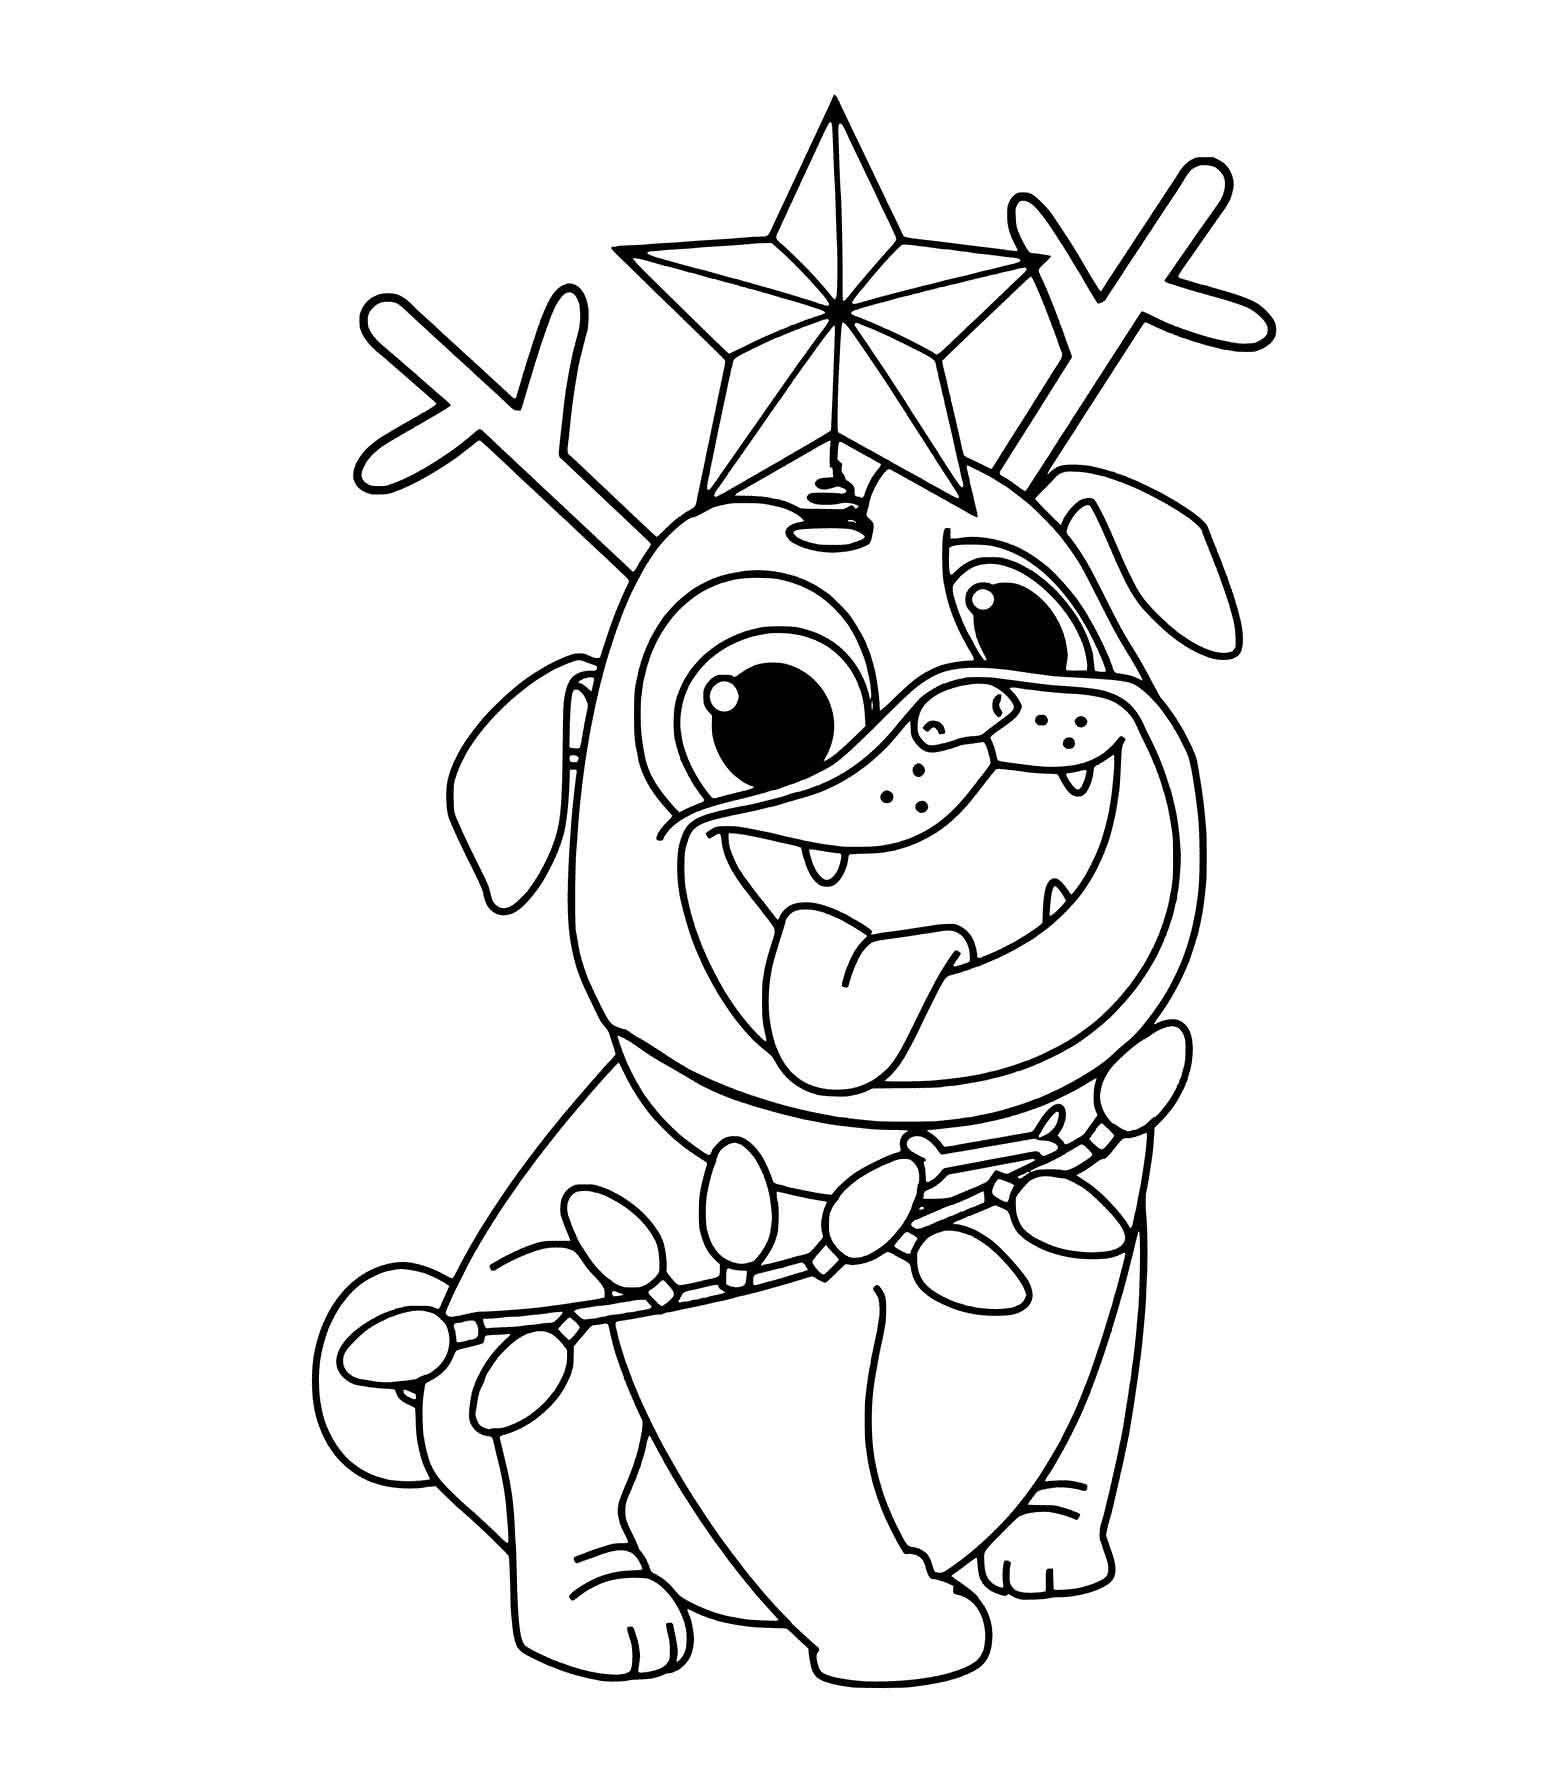 Puppy Dog Pals Christmas Rolly Coloring Pages Pictures ...